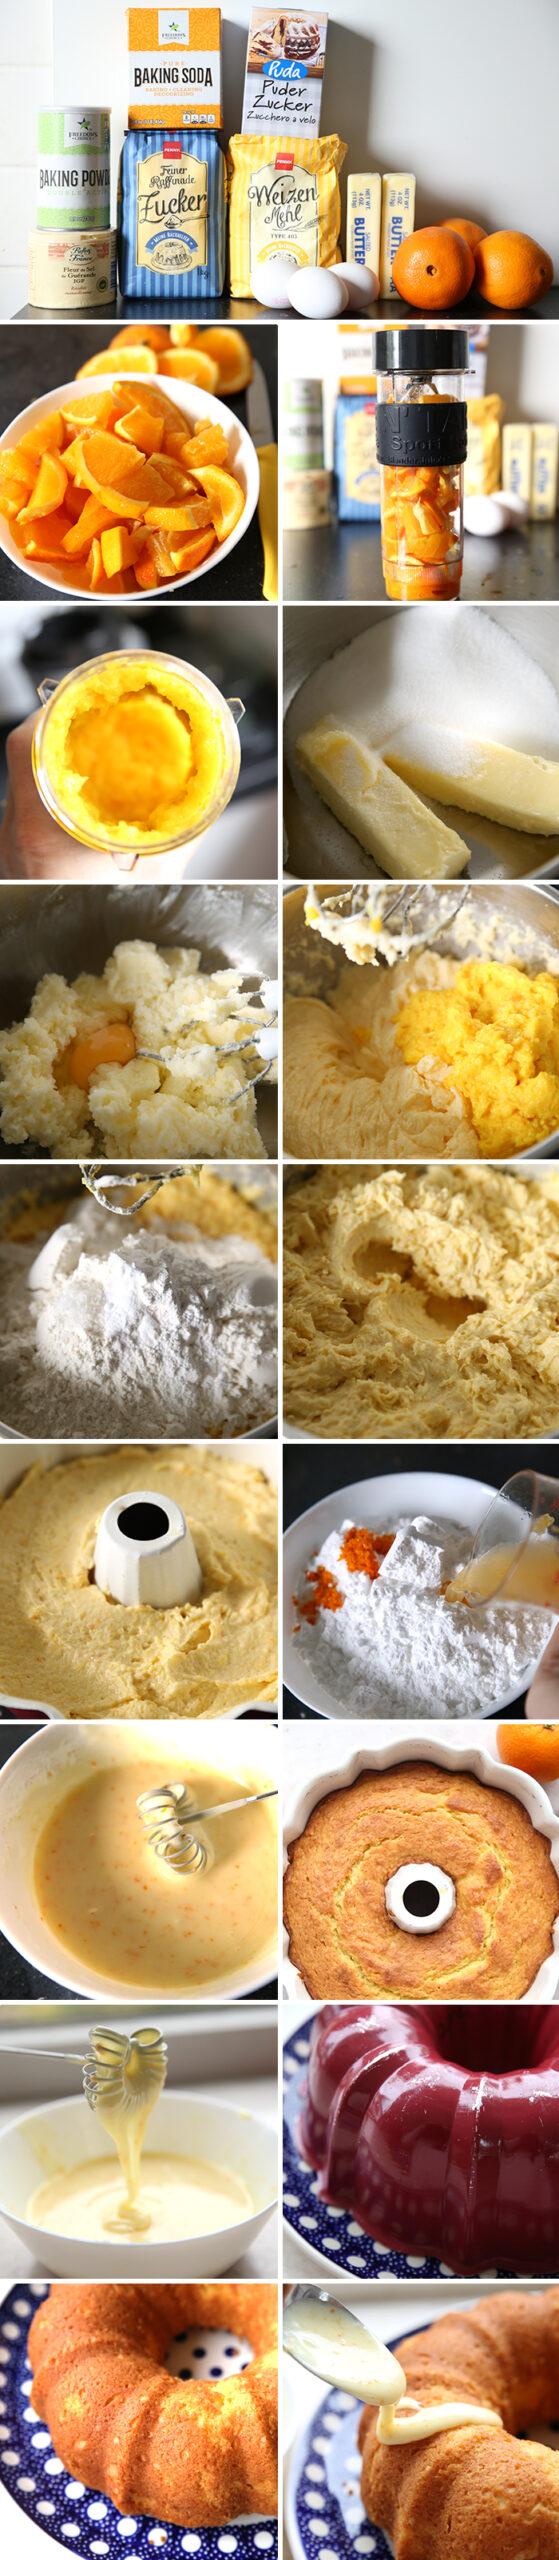 Step by step pictures for how to make Whole Orange Cake